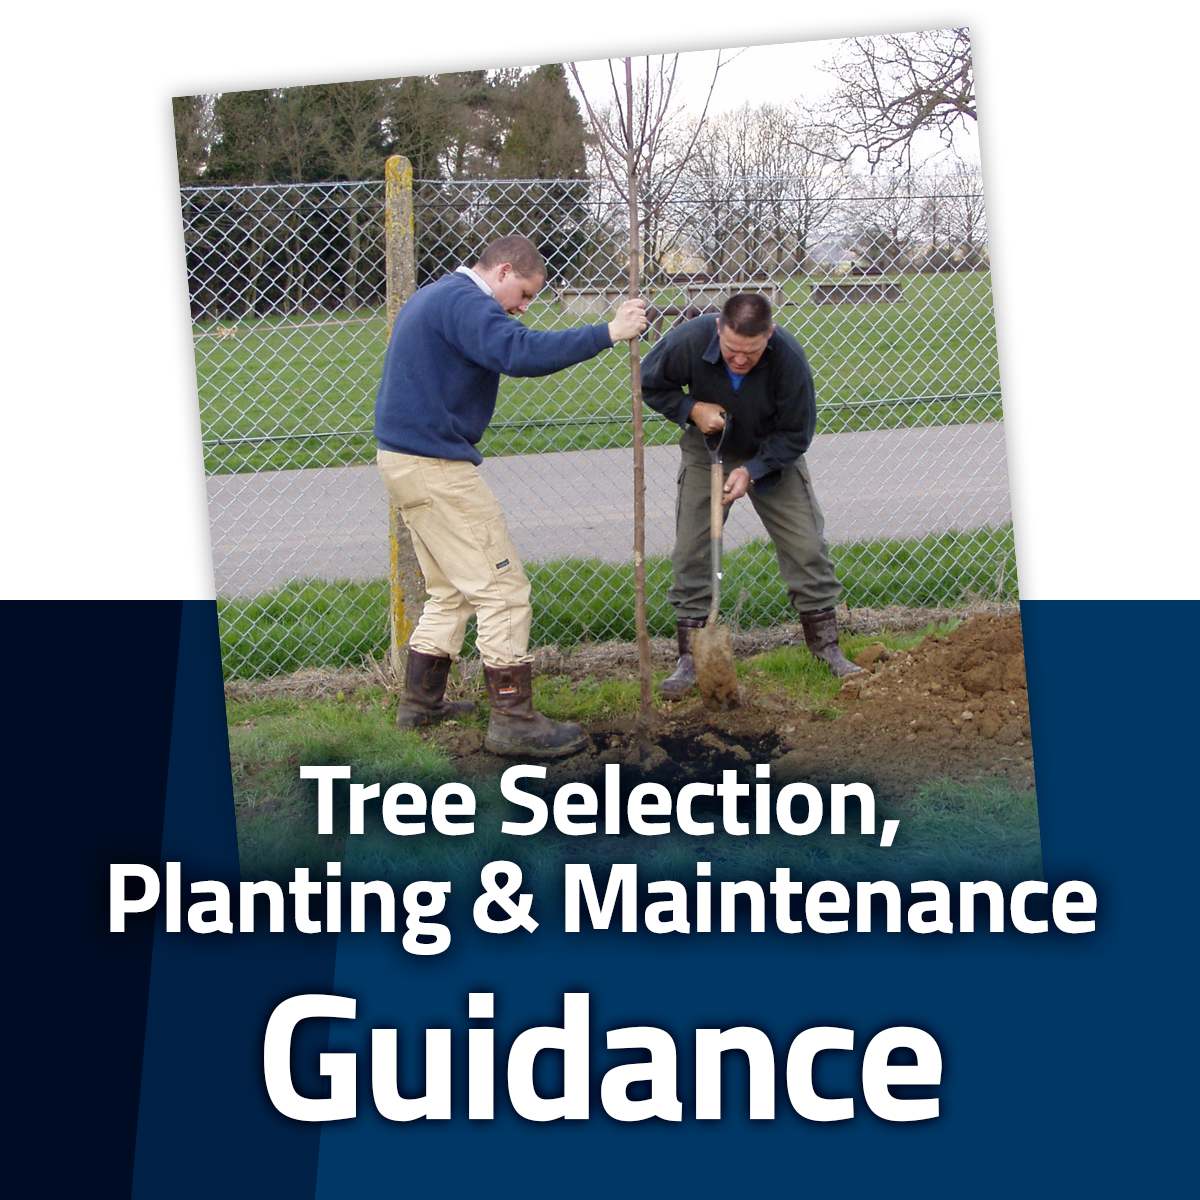 Guide to Tree Selection, Planting and Maintenance